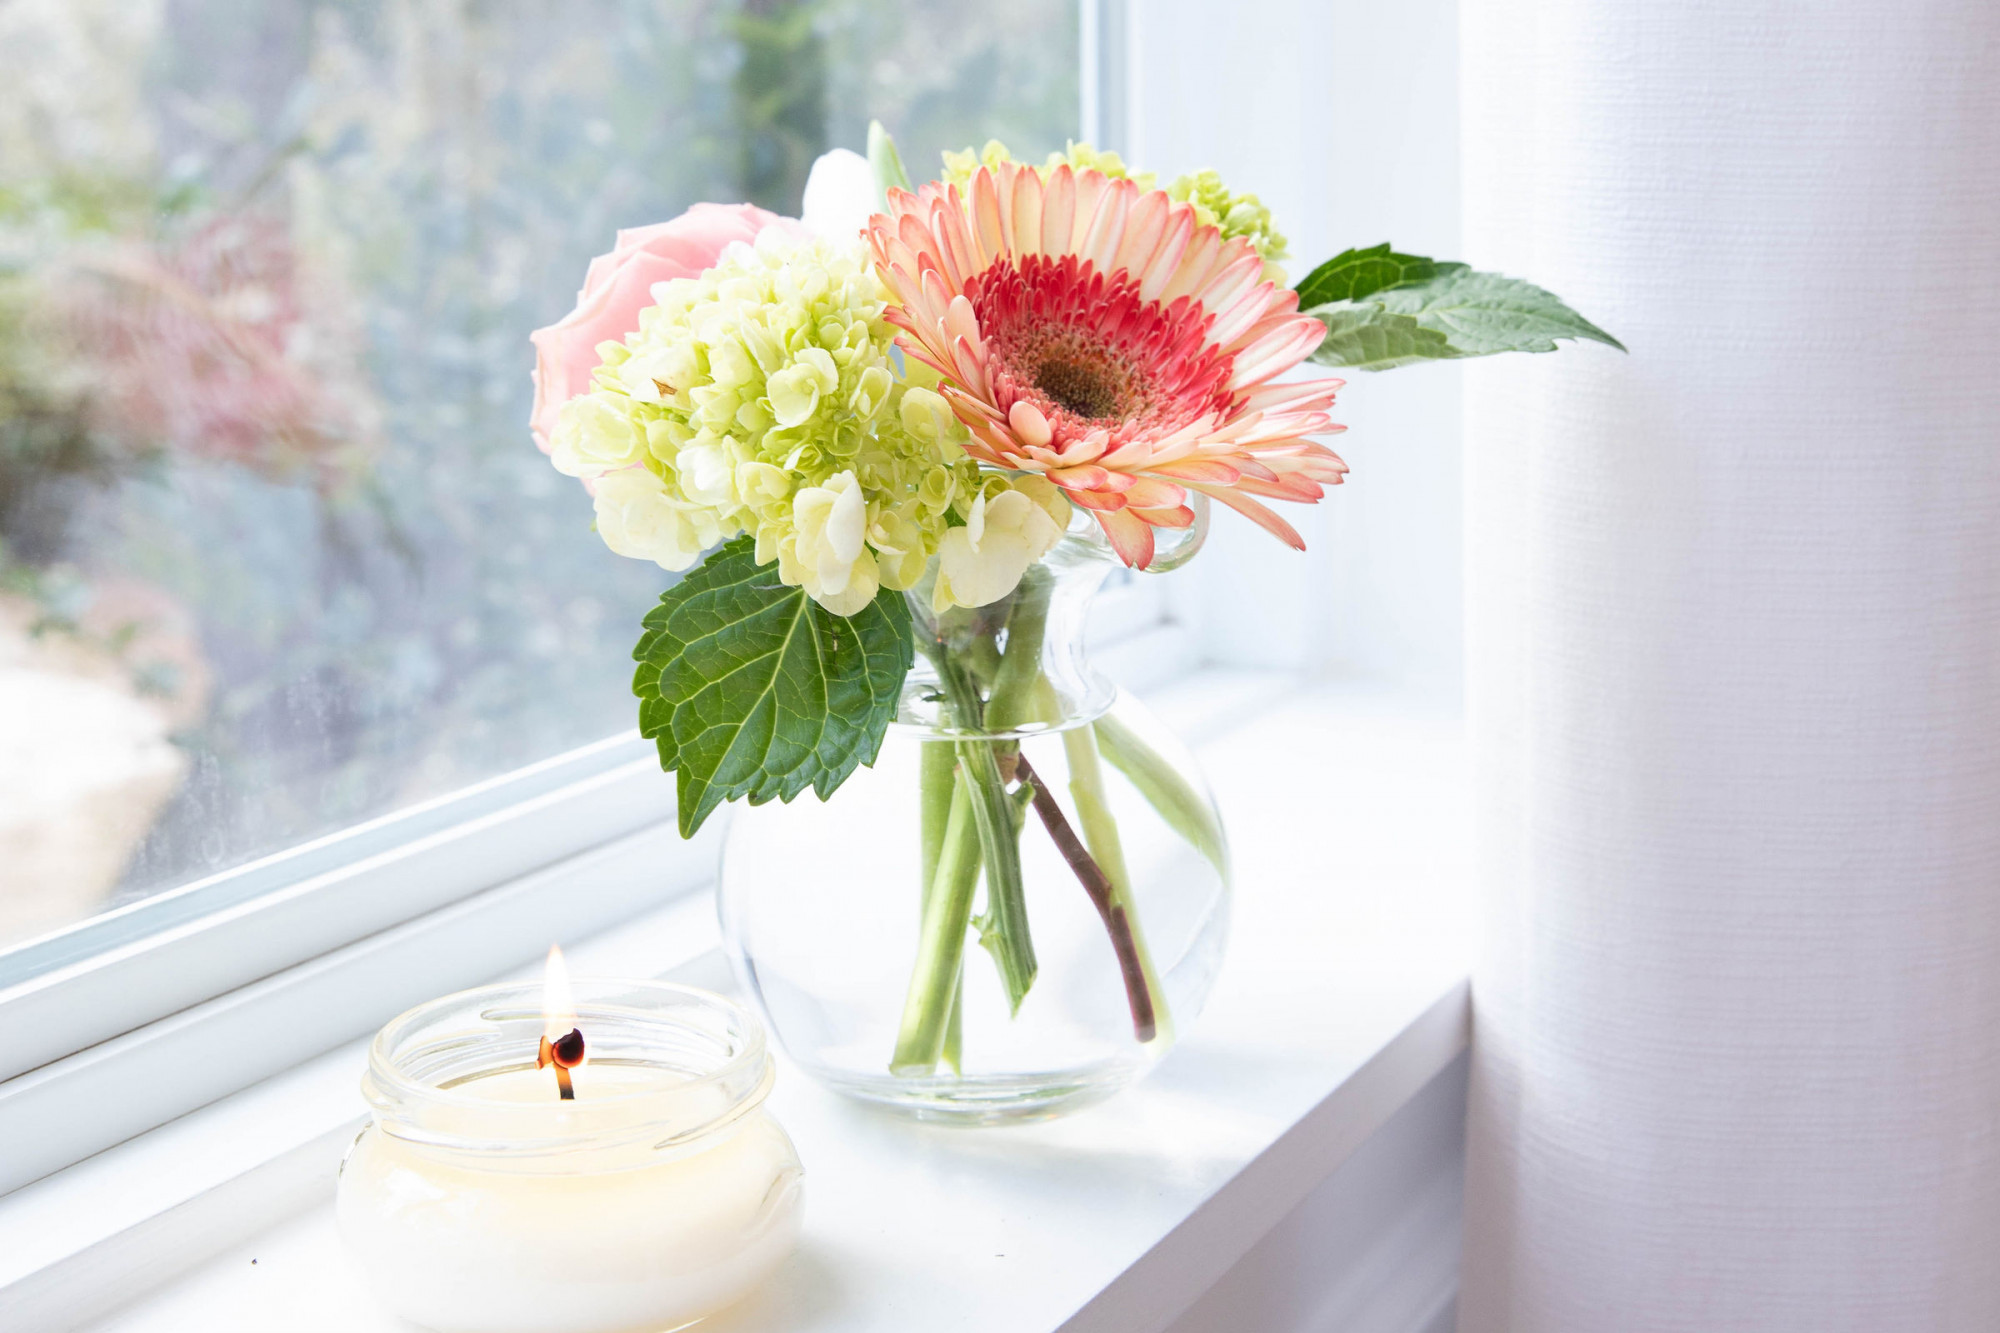 Sympathy flowers on windowsill with a candle